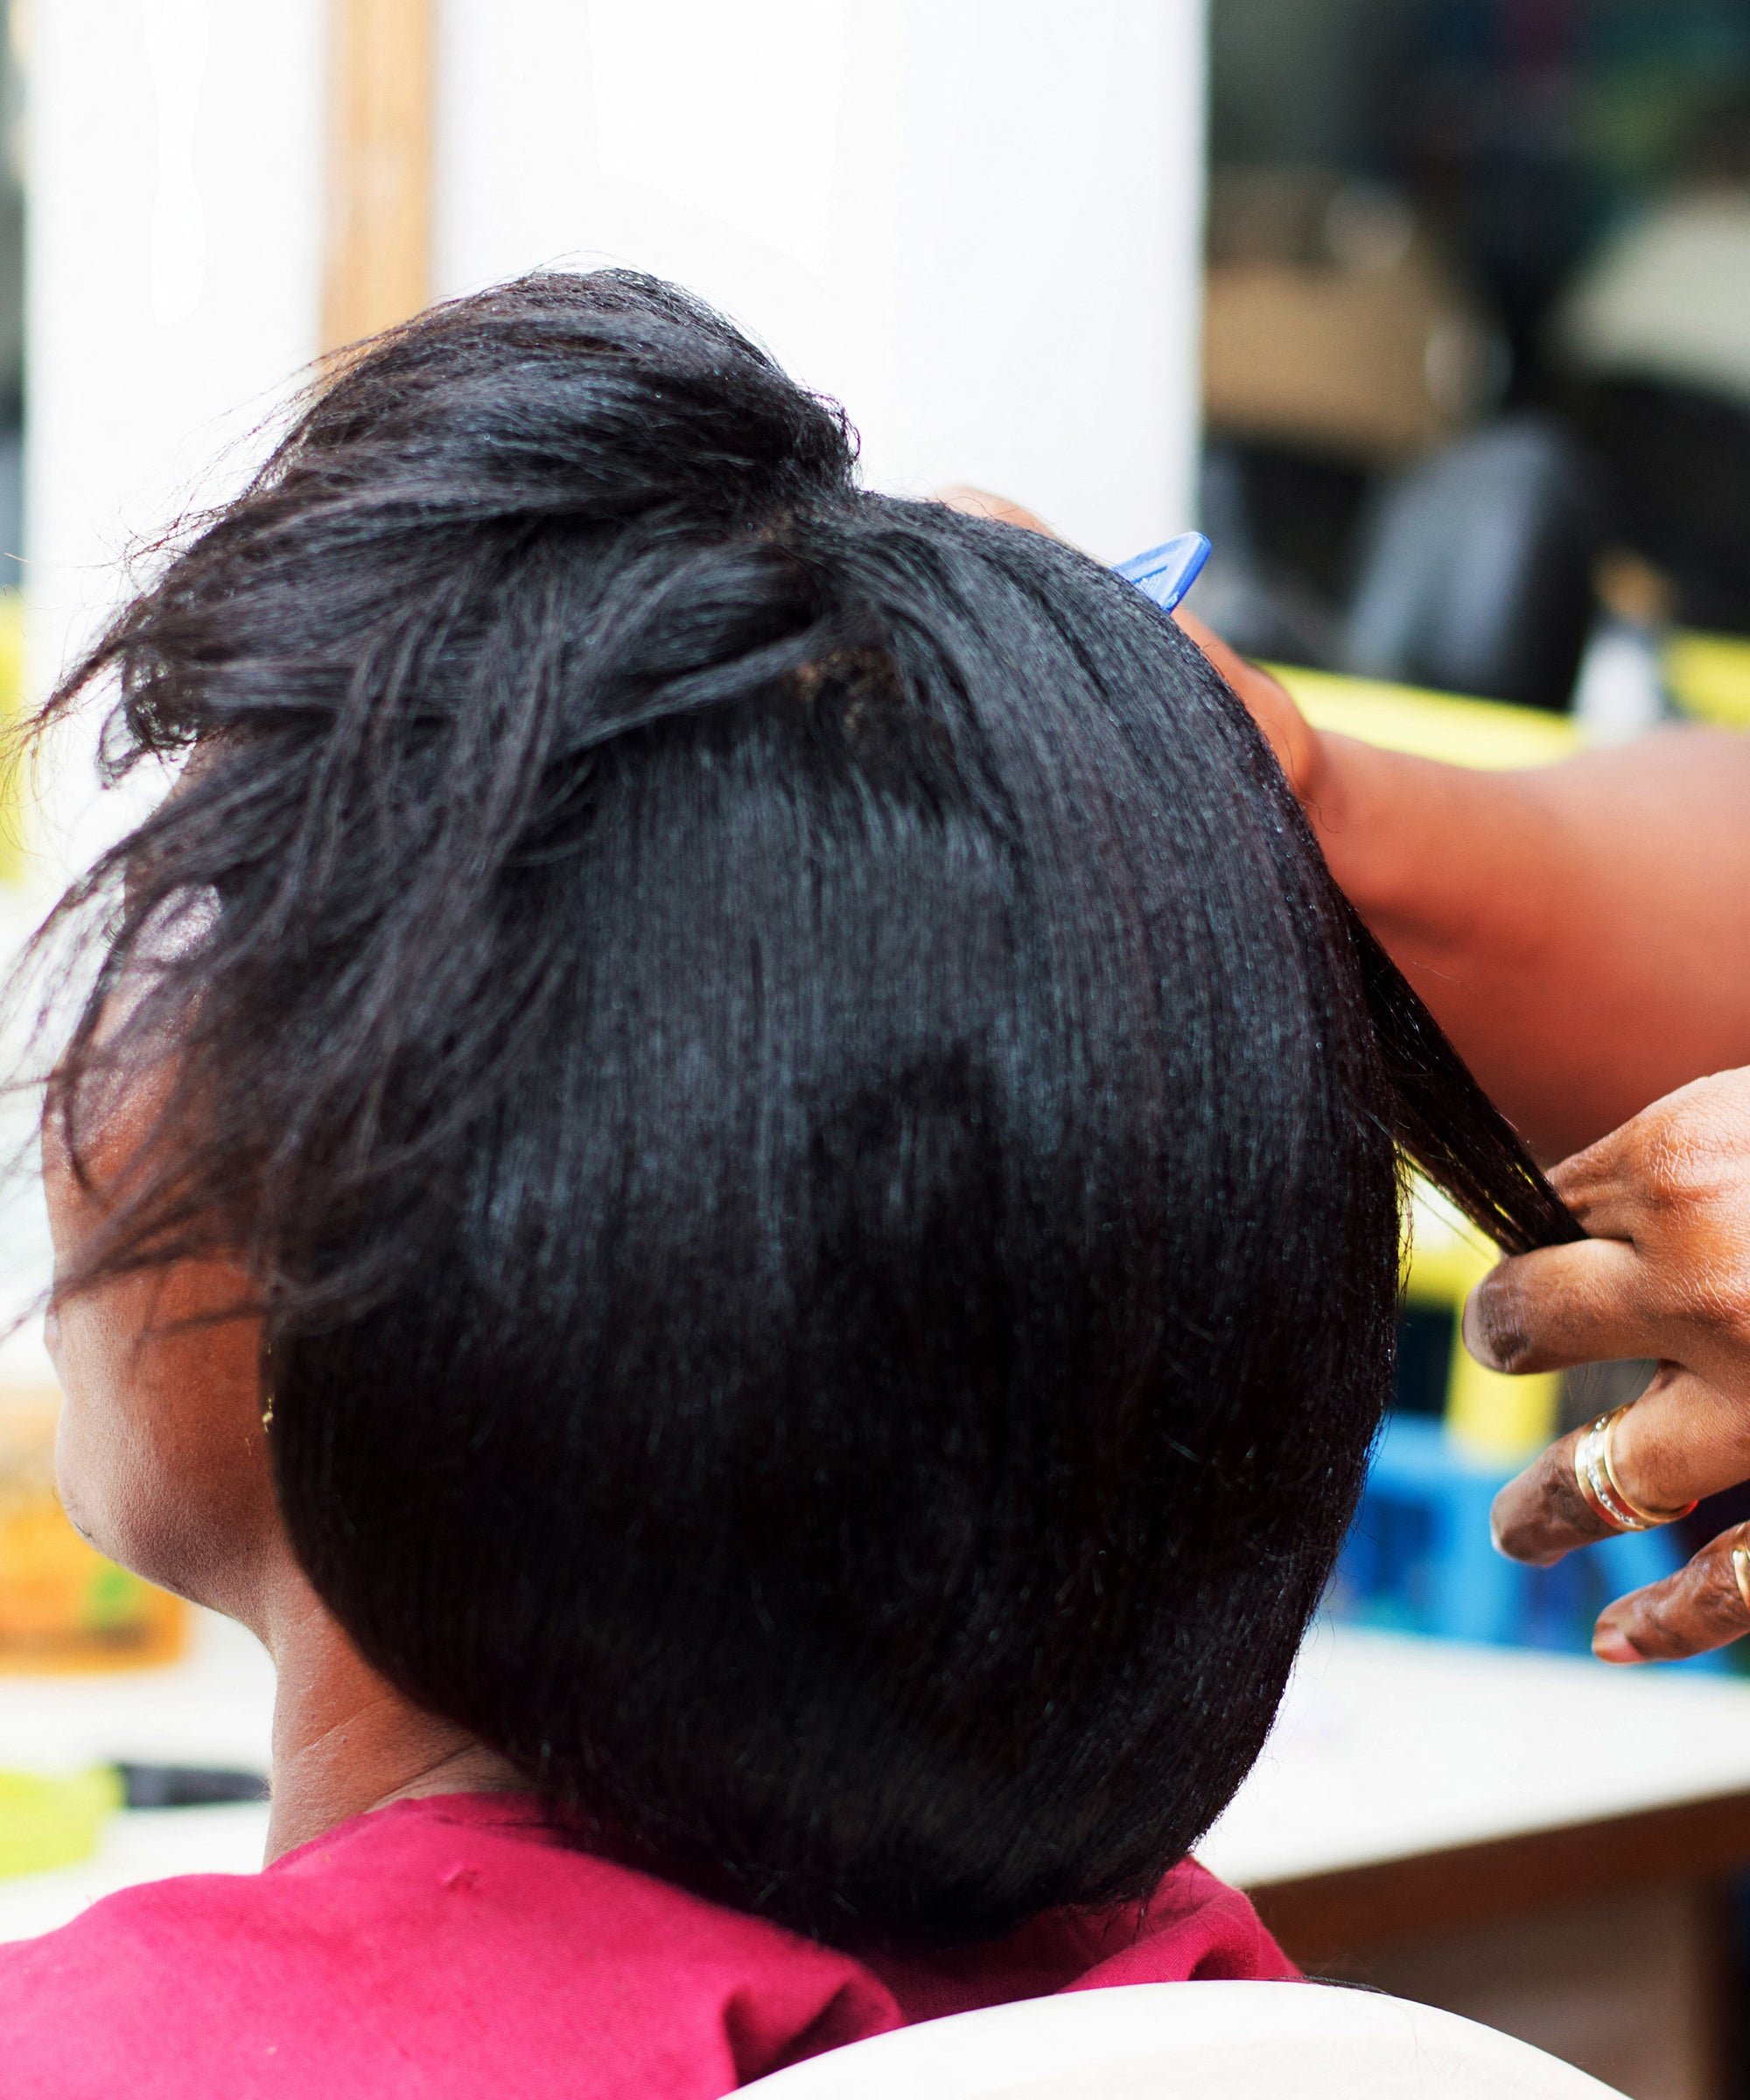 Do Hair Relaxers Really Cause Cancer? Experts Explain